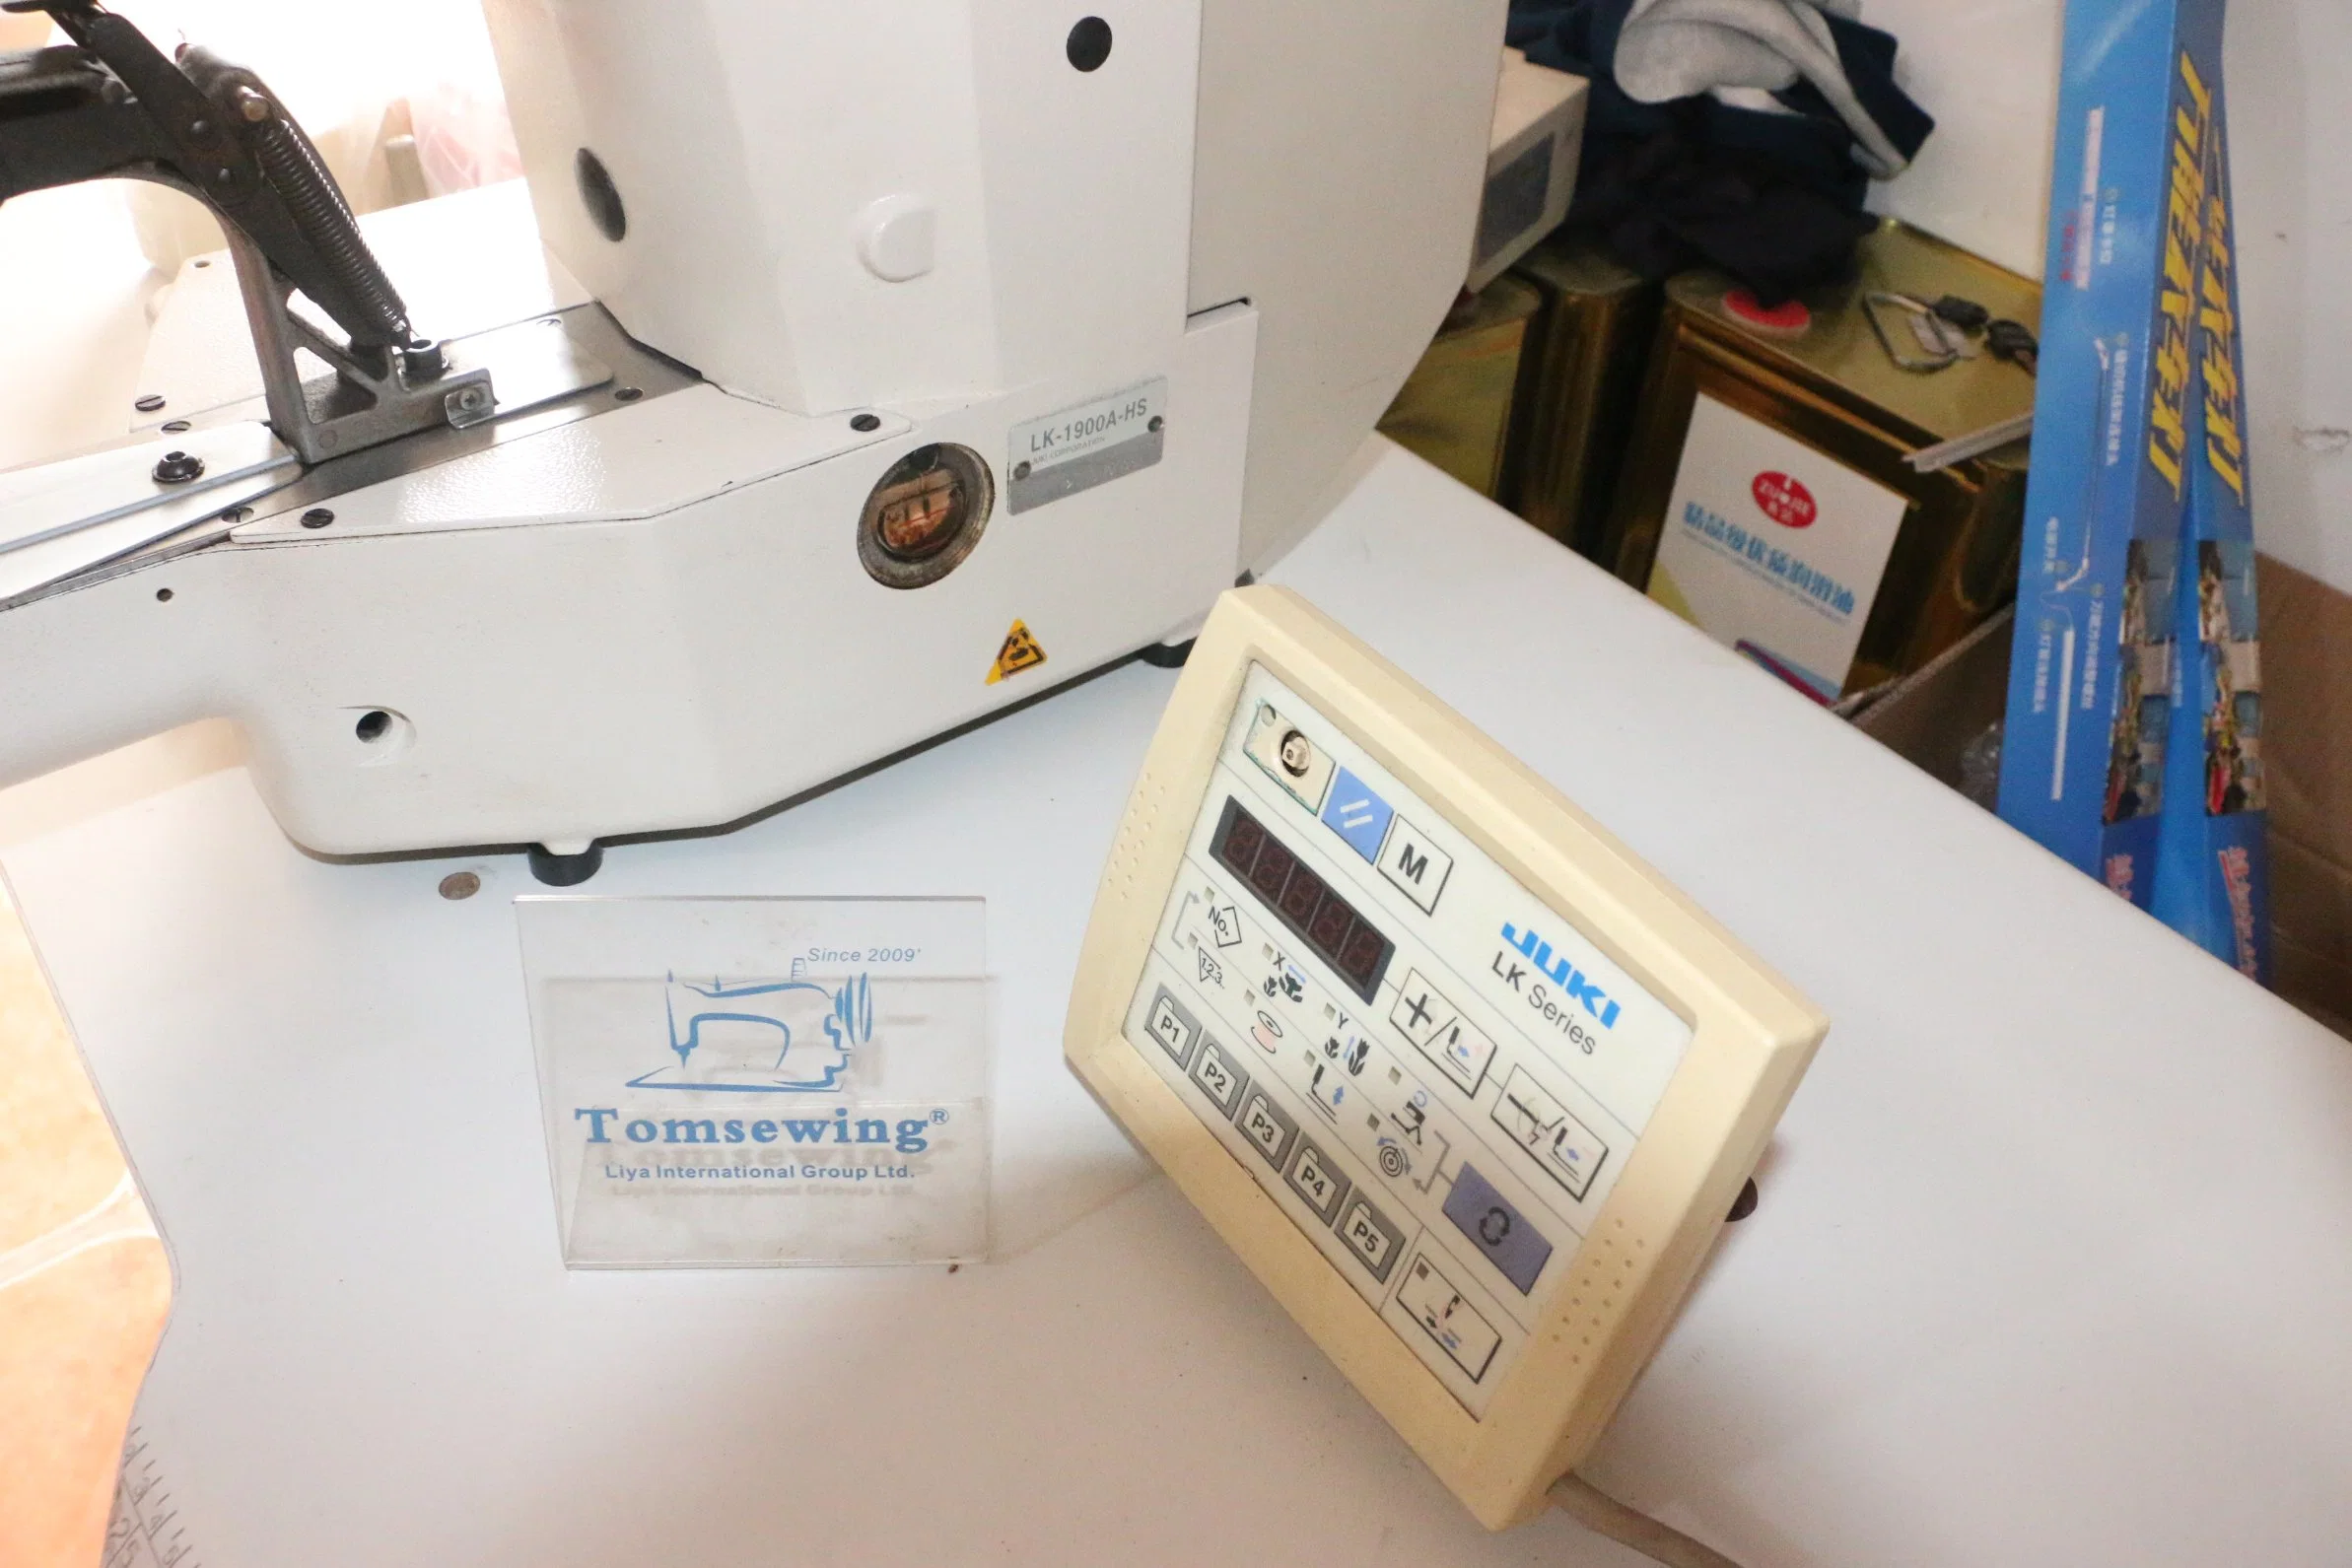 Programmable Used Bartacking Sewing Machine Secondhand Electronic Juki Lk 1900A Old 2ND Maquinas De Coser Industriales Usedas